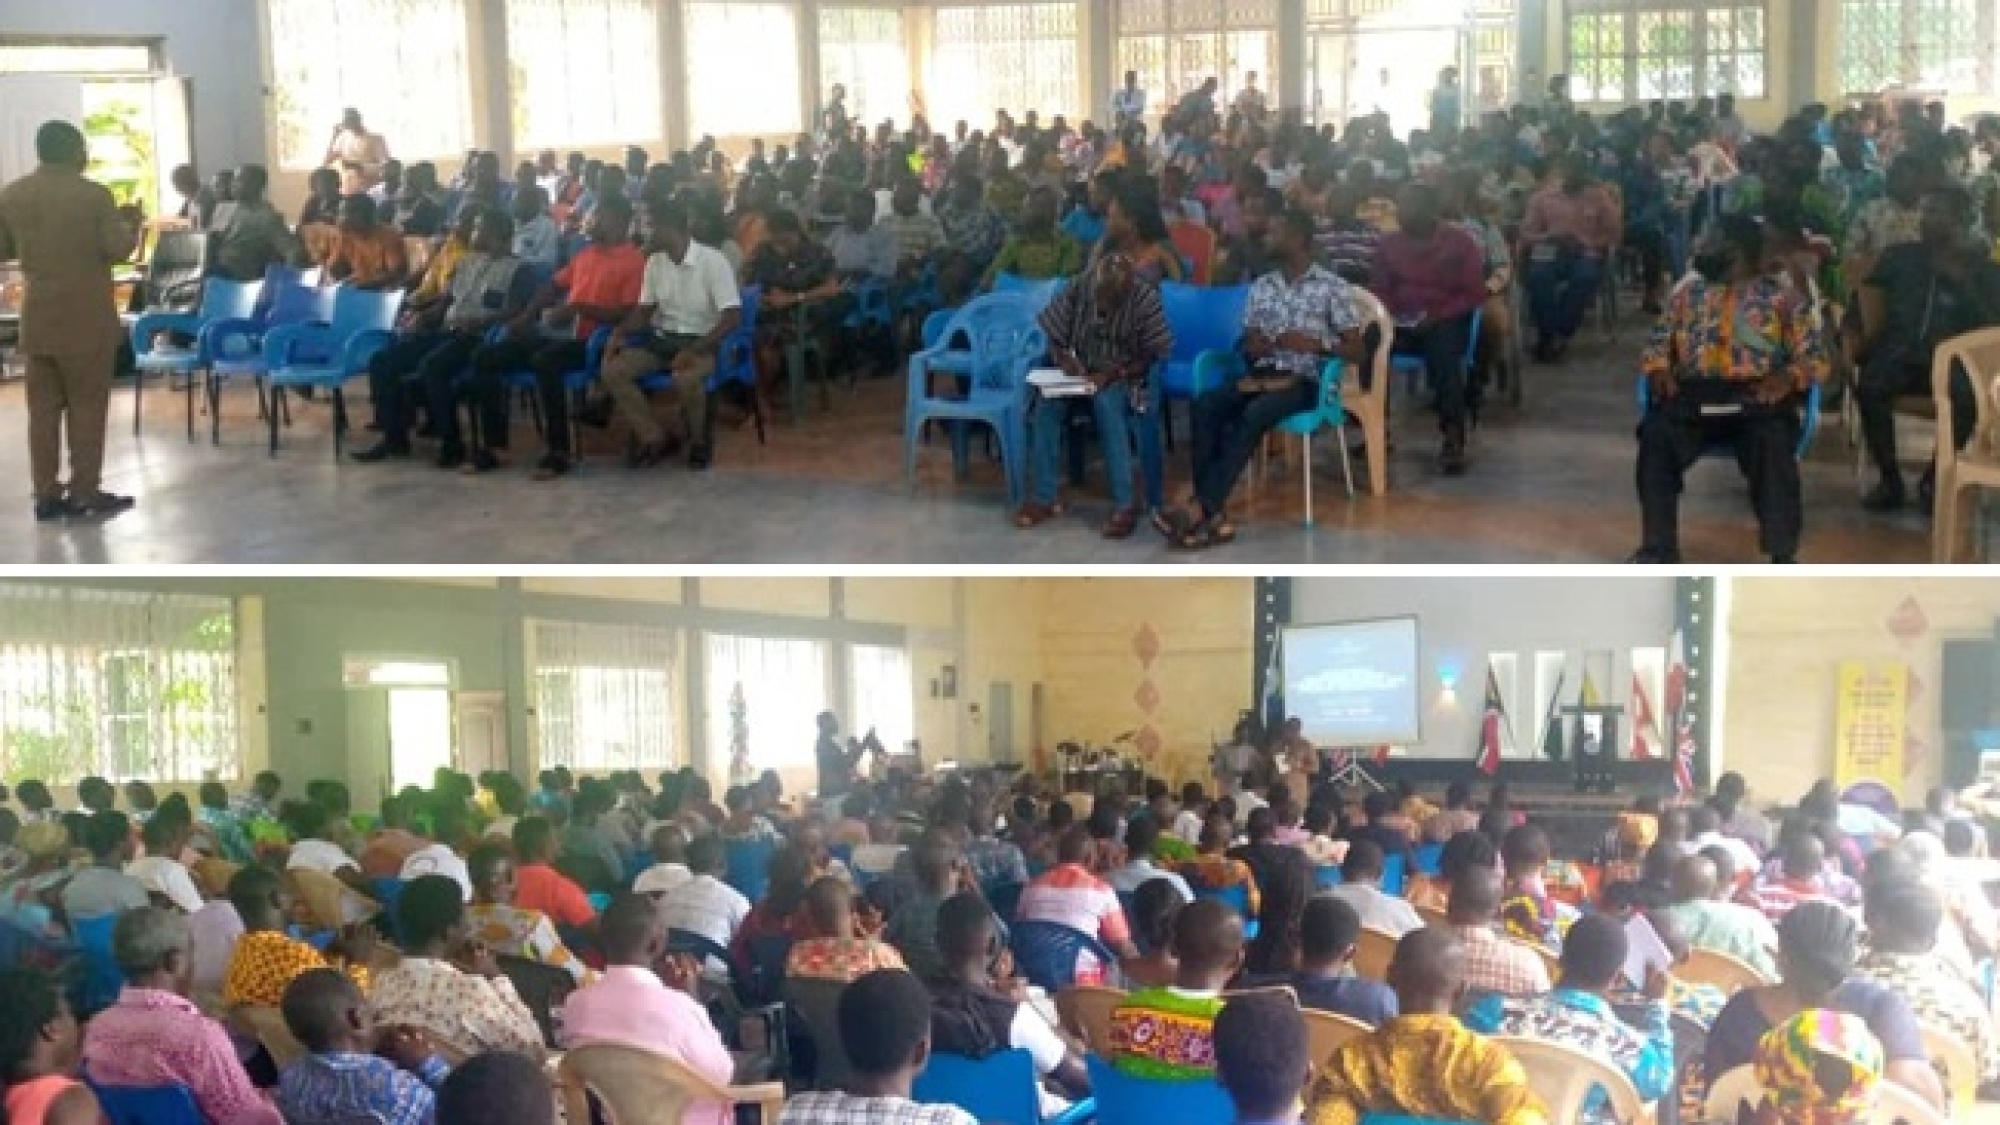 Agormanya Area Trains Church Workers On Effective Church Administration web